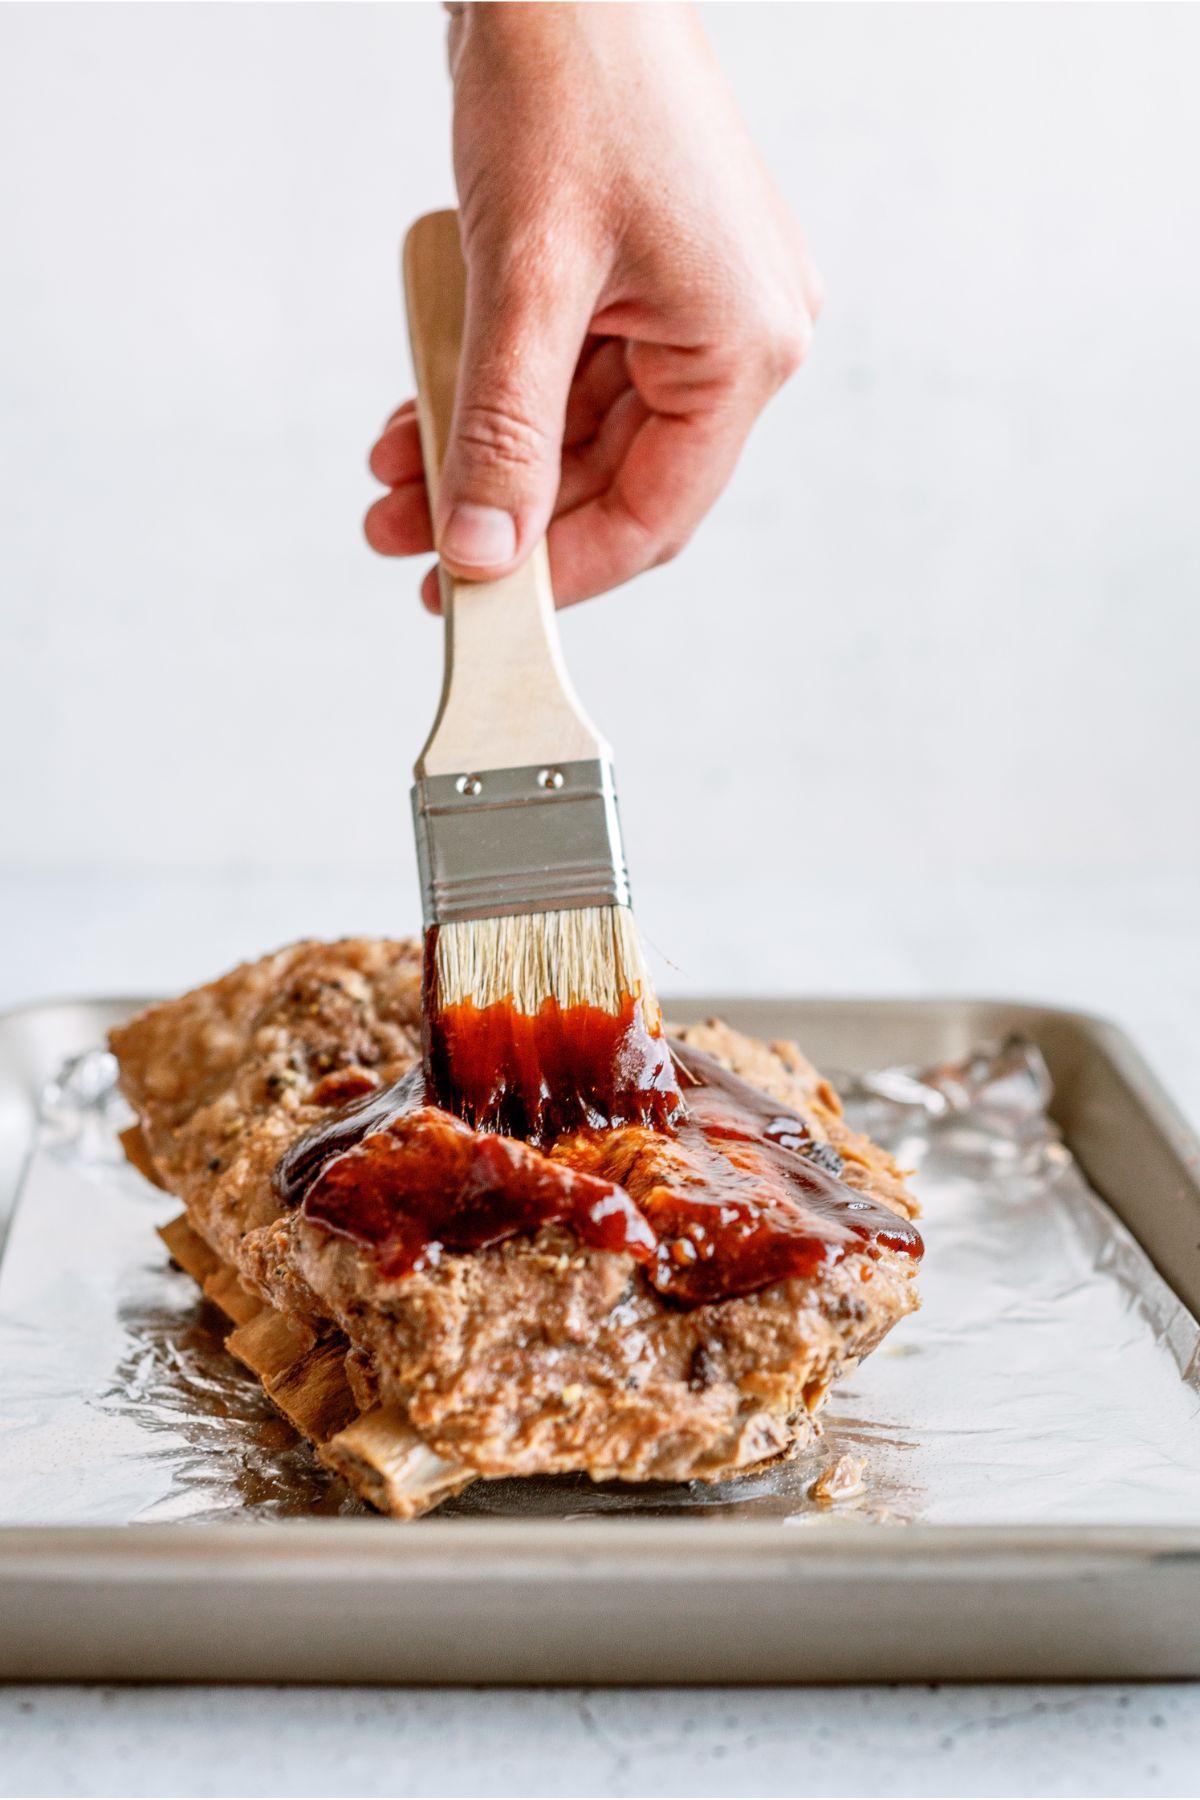 Brushing BBQ Sauce on top of cooked ribs